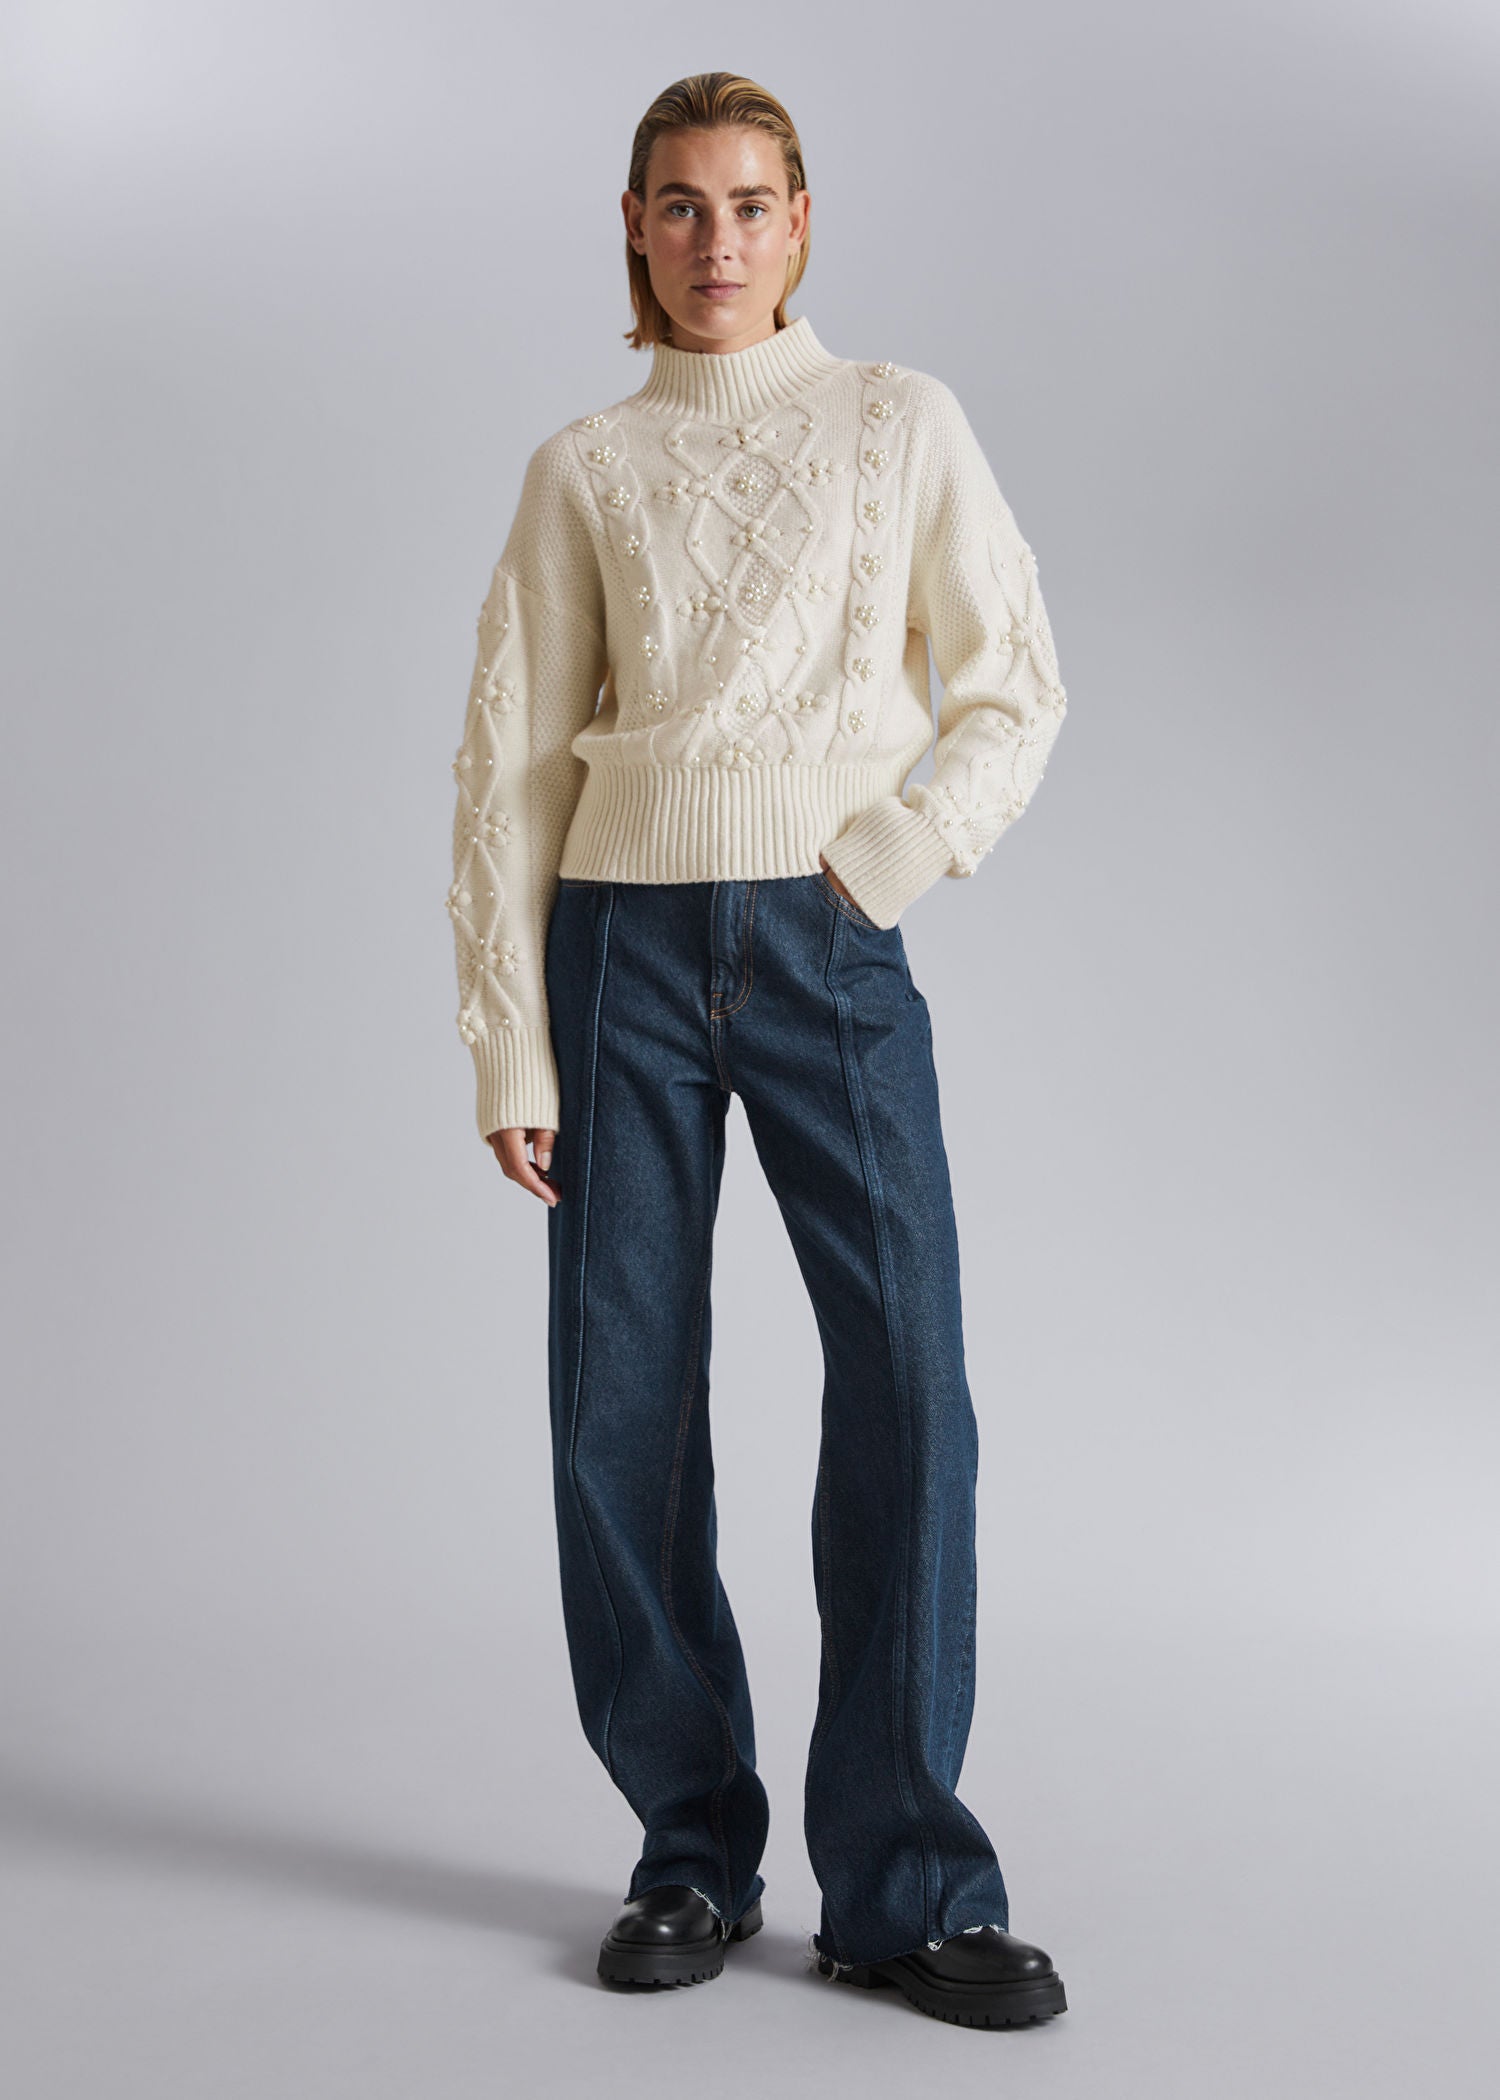 & Other Stories + Pearl Bead Cable Knit Jumper